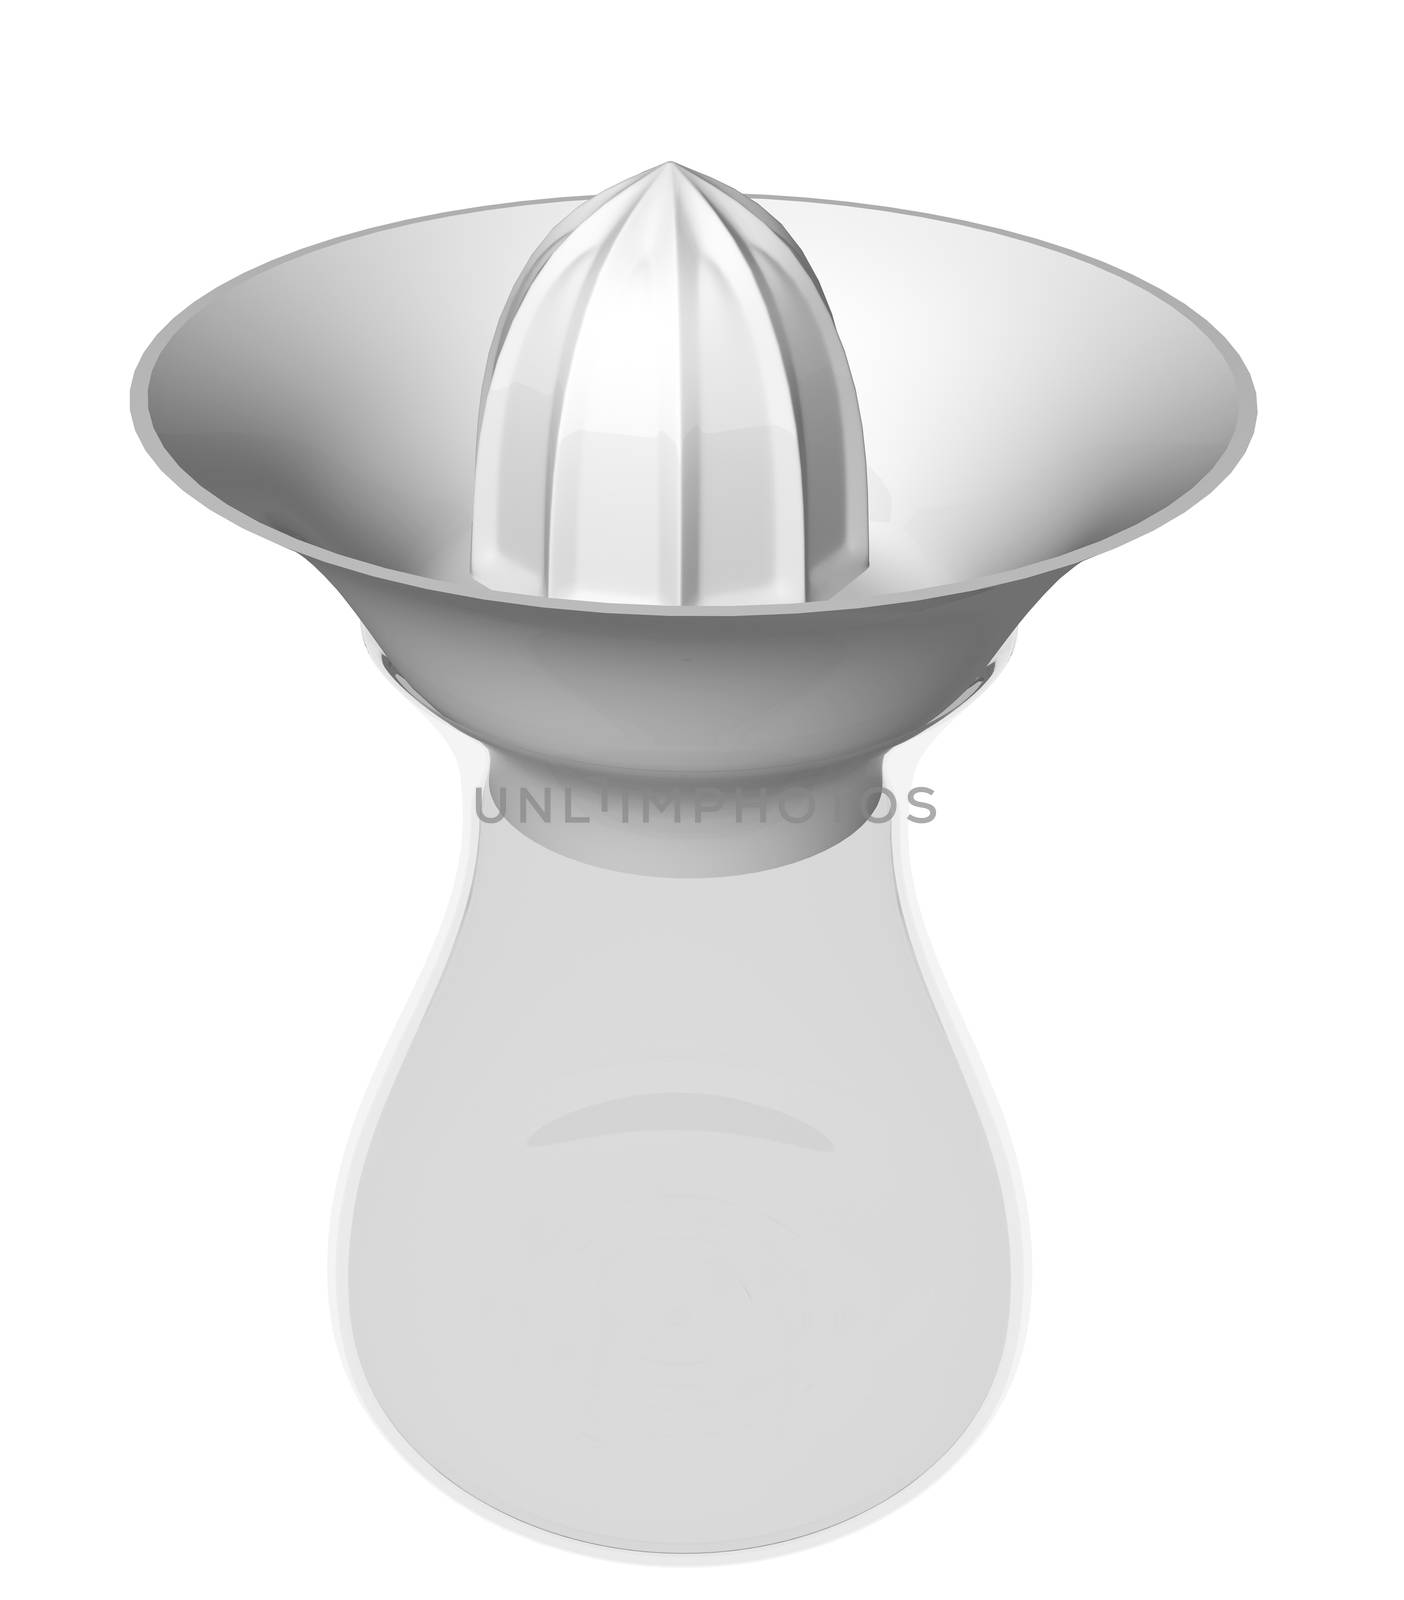 Juicer with glass jar, 3D illustration, isolated against a white background